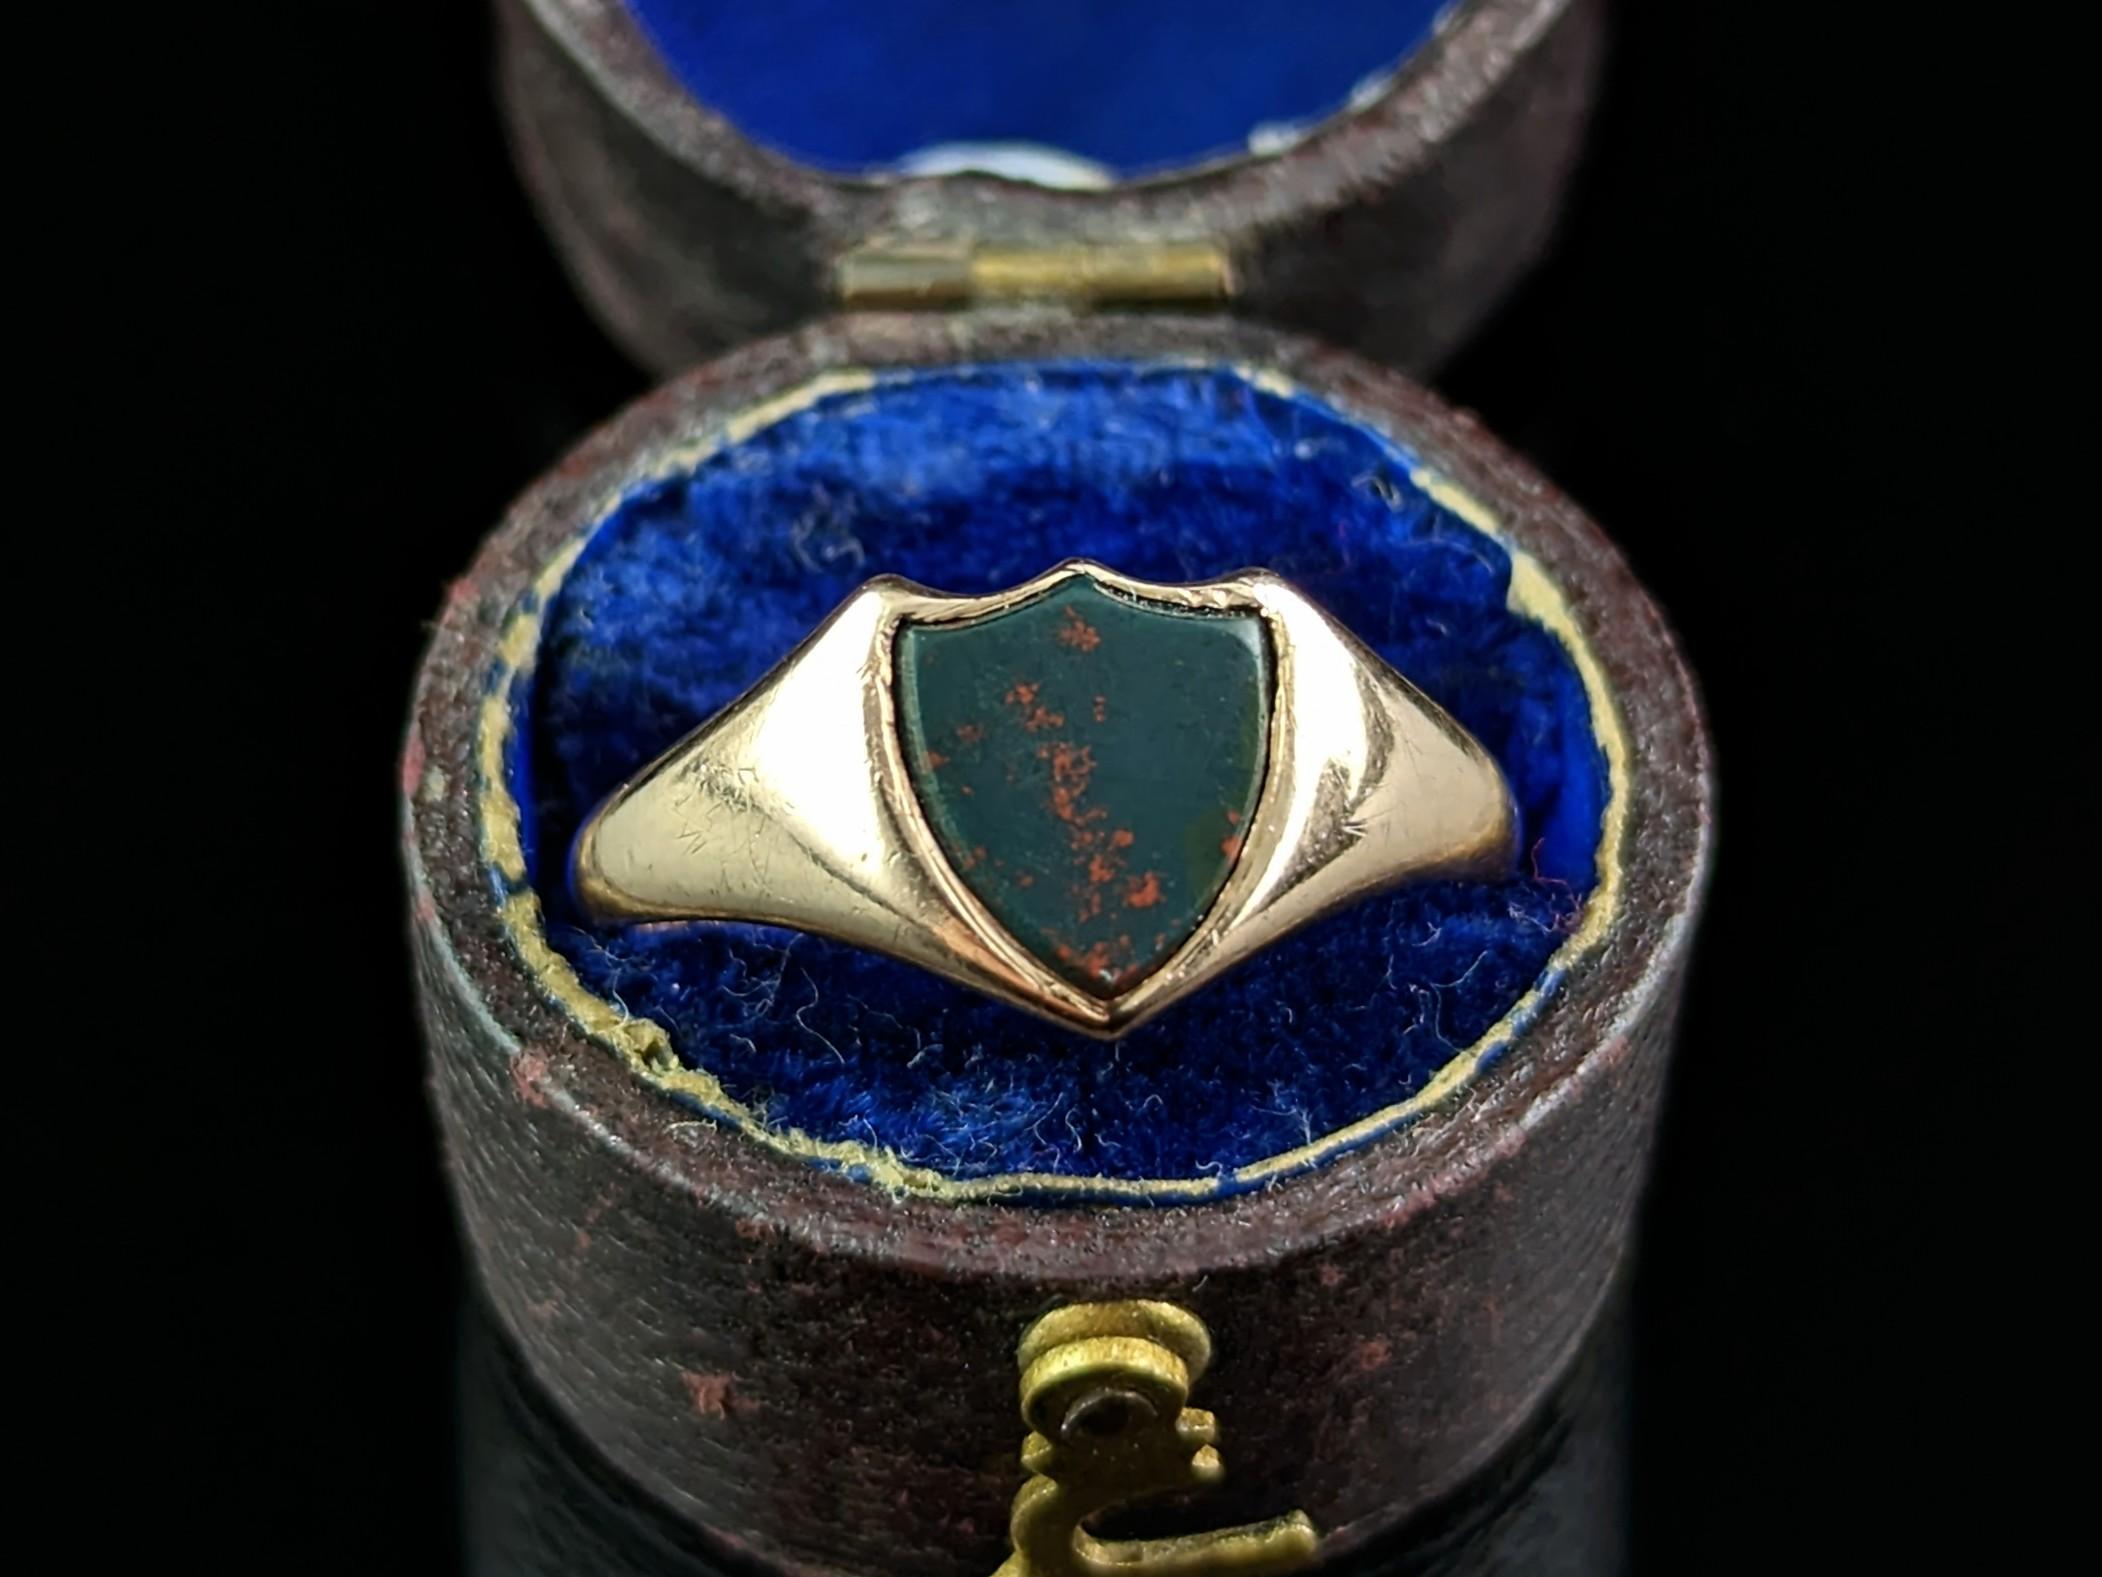 This handsome antique, Edwardian era
9kt gold and Bloodstone signet ring has everything you could wish for in a signet ring!

It is a dainty yet bold ring, perfect as a pinky ring, it has a shield shaped face set with a rich dark green Bloodstone,